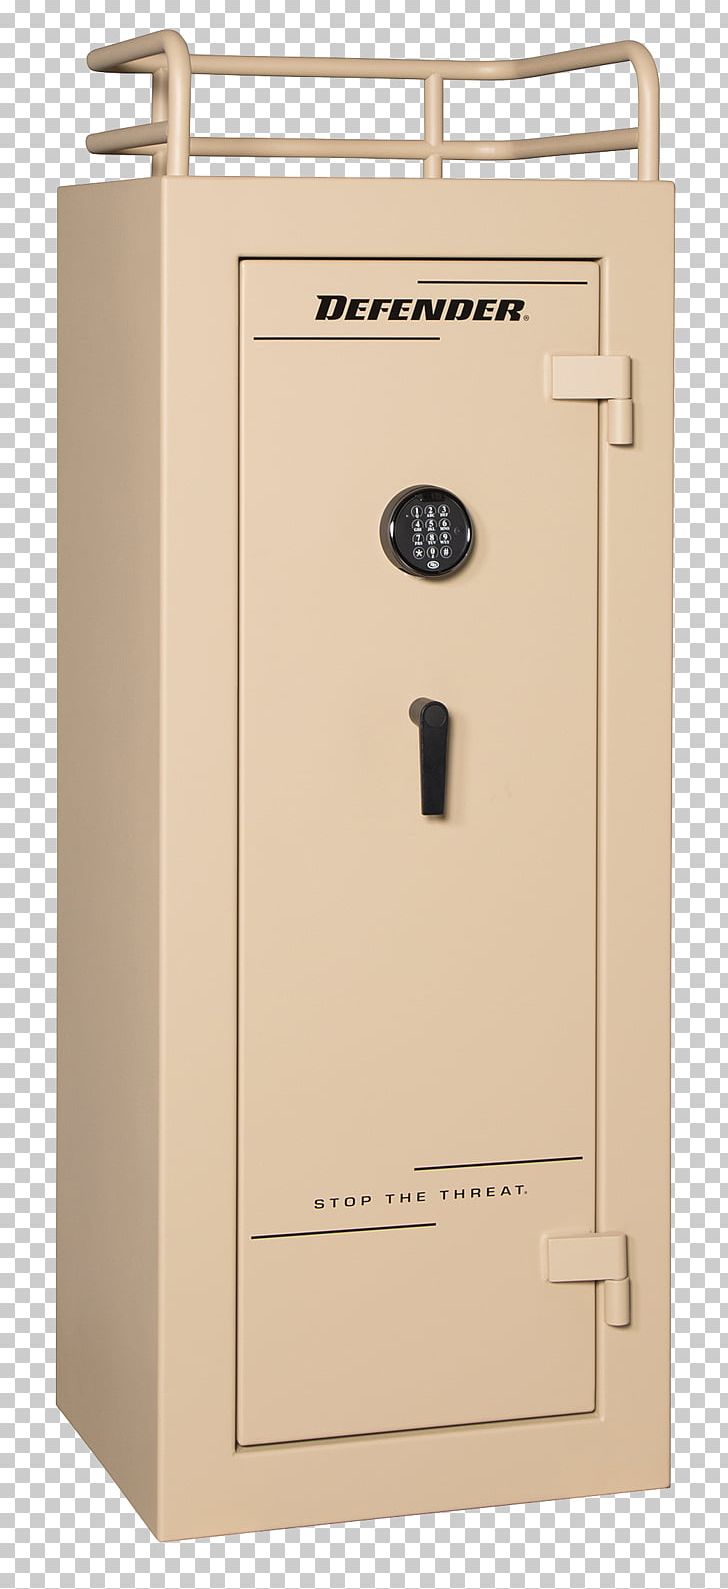 Gun Safe Winchester Repeating Arms Company Firearm Winchester Model 1200 PNG, Clipart, Ammunition, Caliber, Electronic Lock, Fire, Firearm Free PNG Download